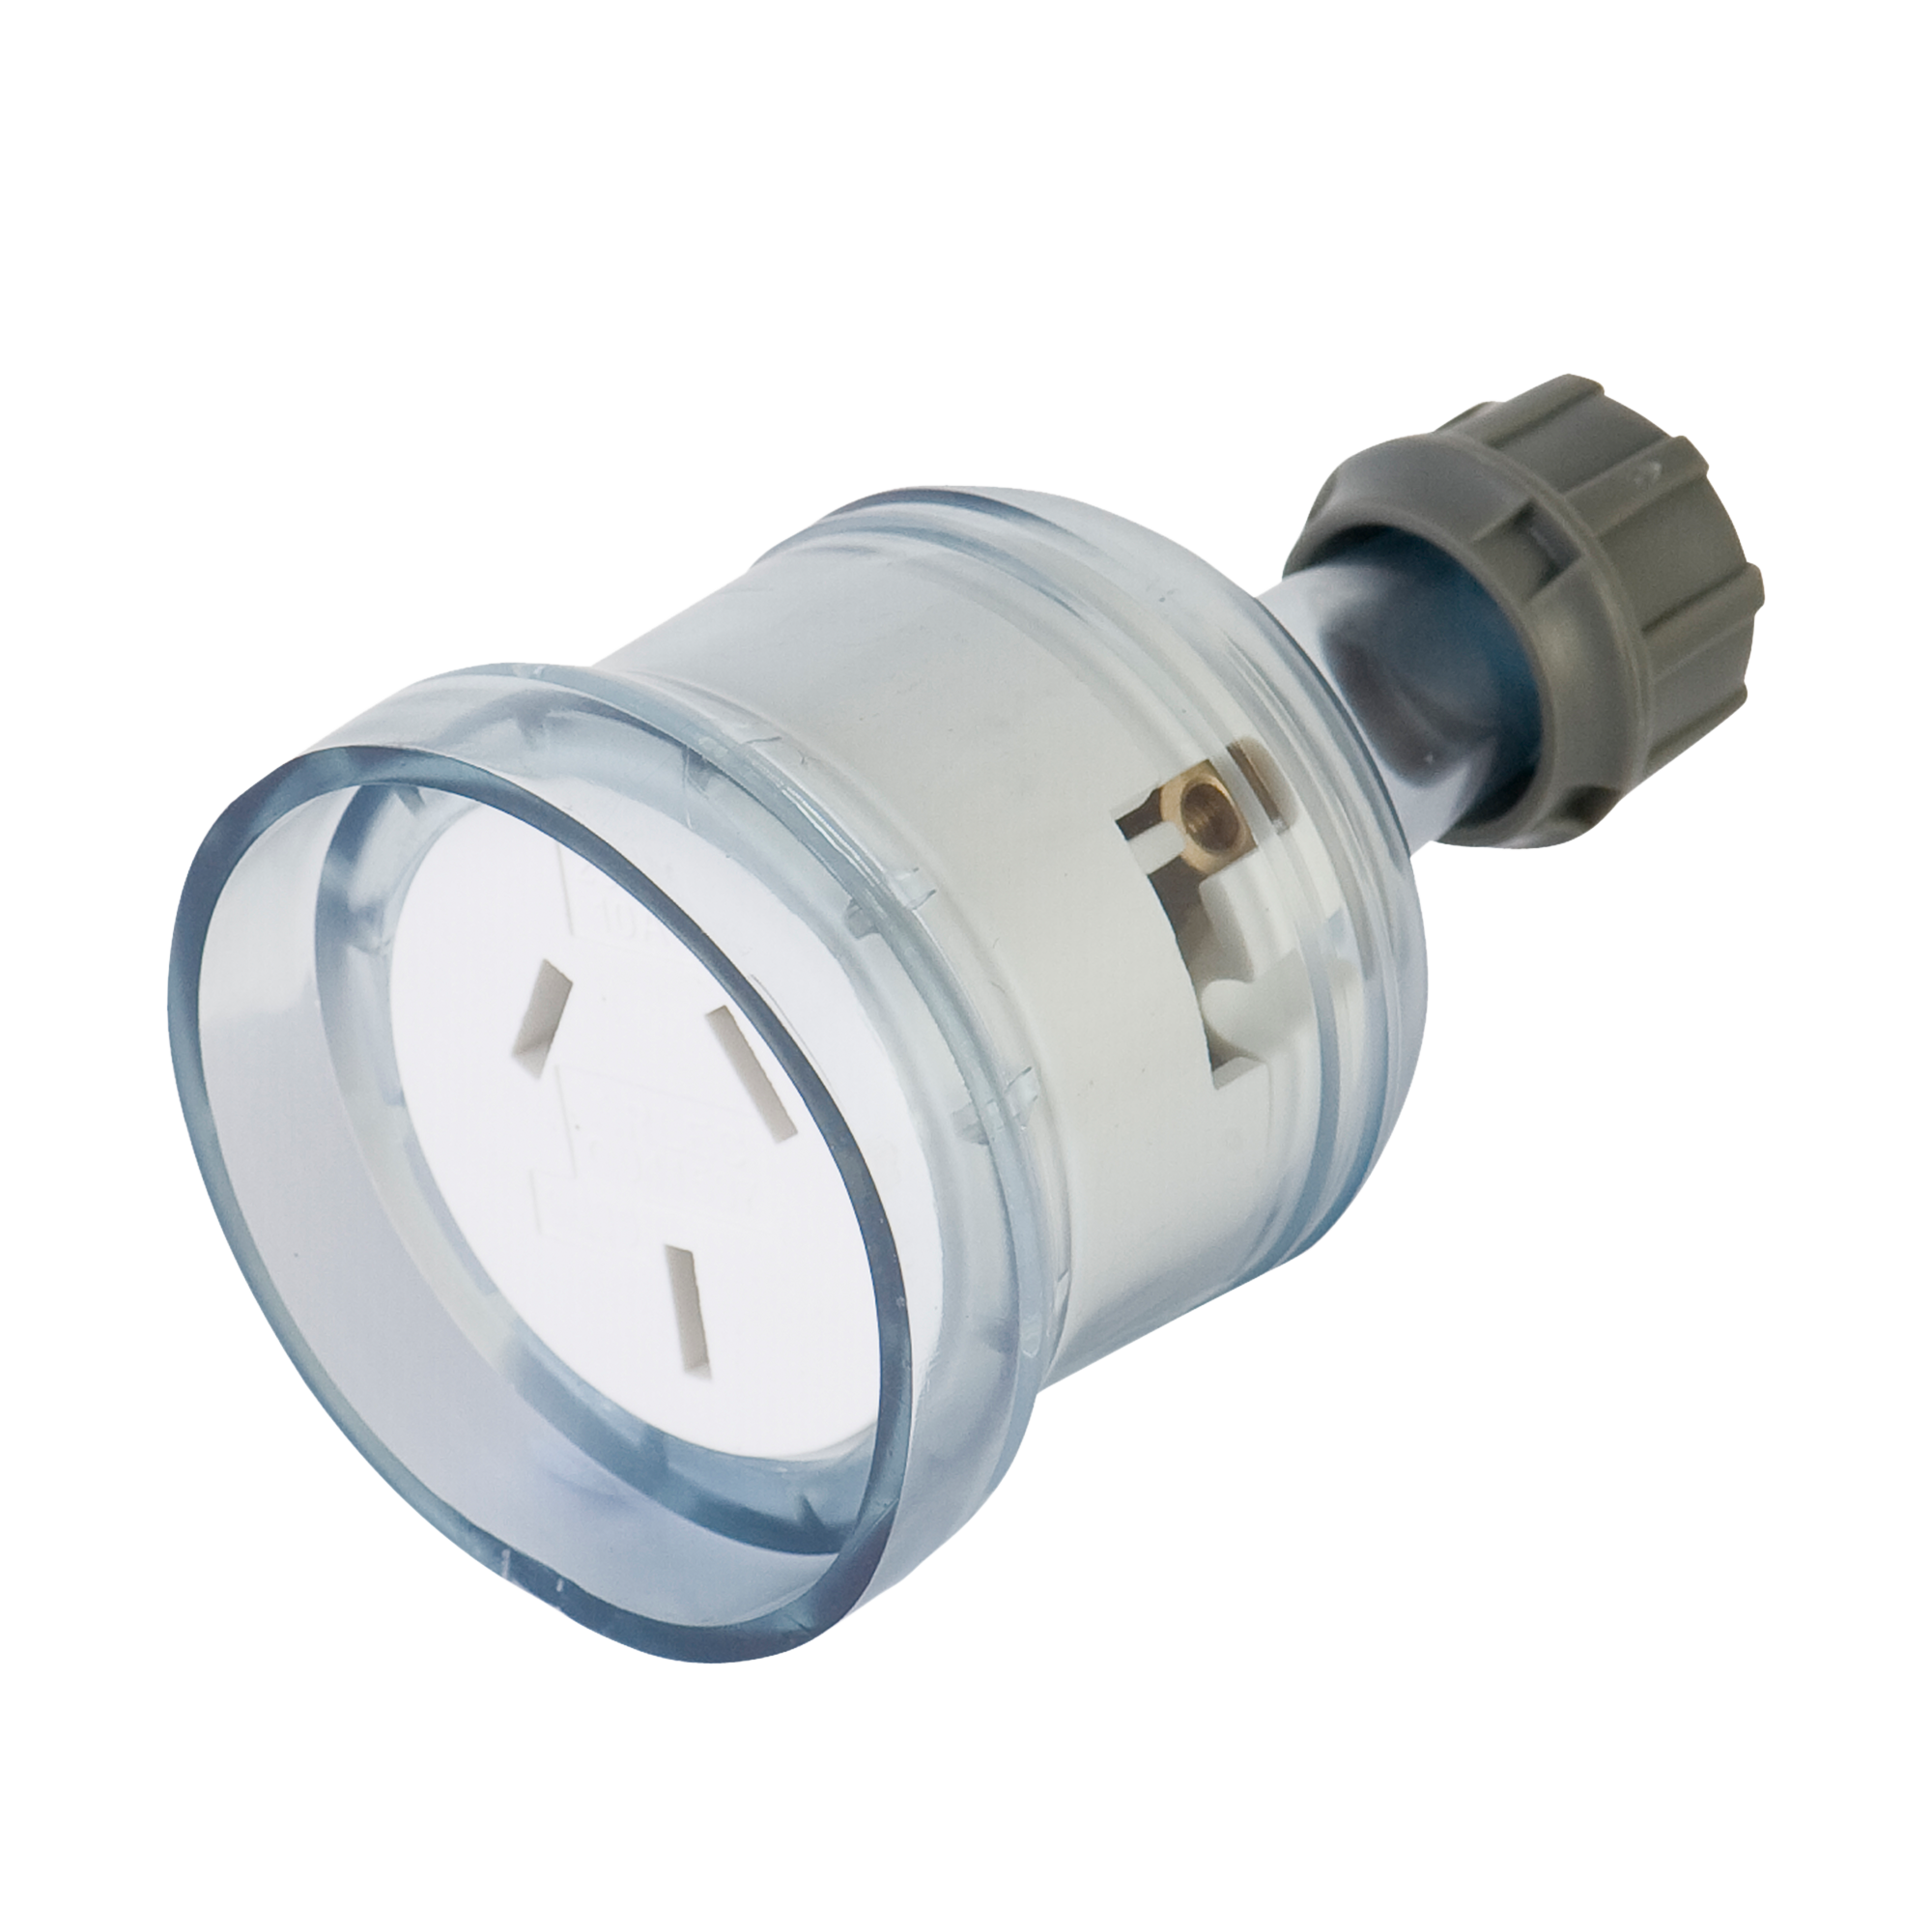   10a clear extension socket